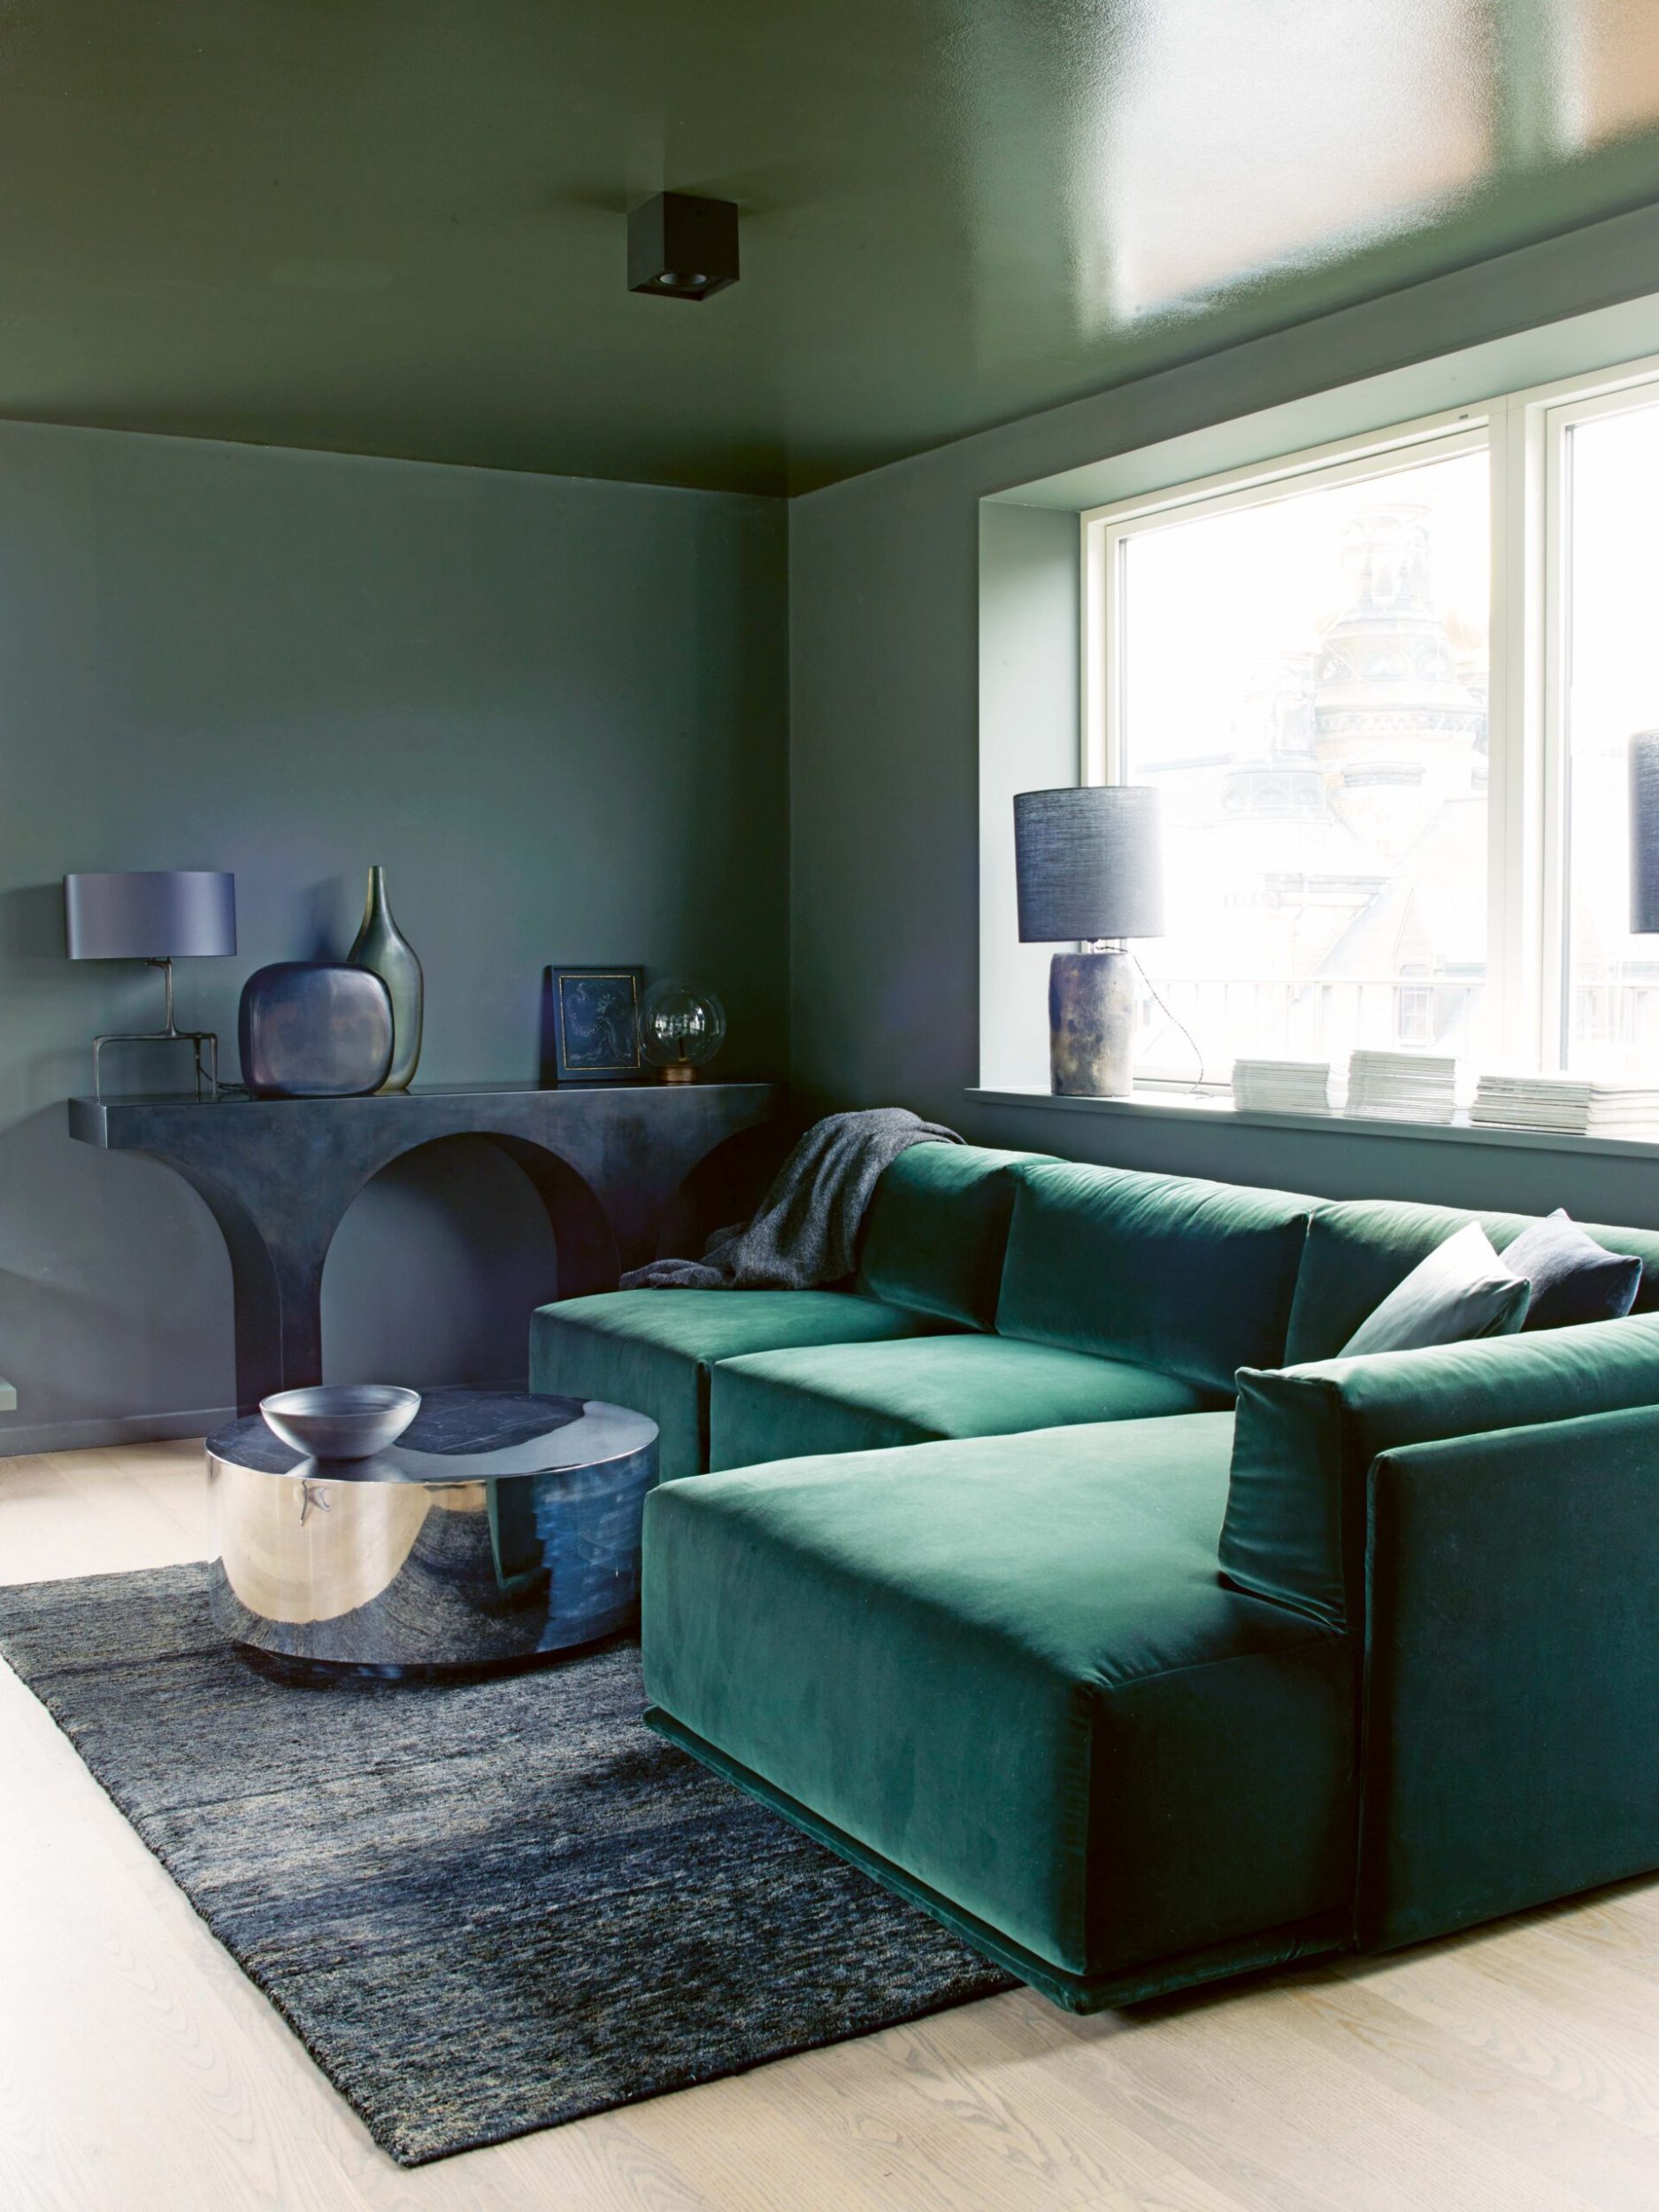 Dark green living room with an emerald green couch